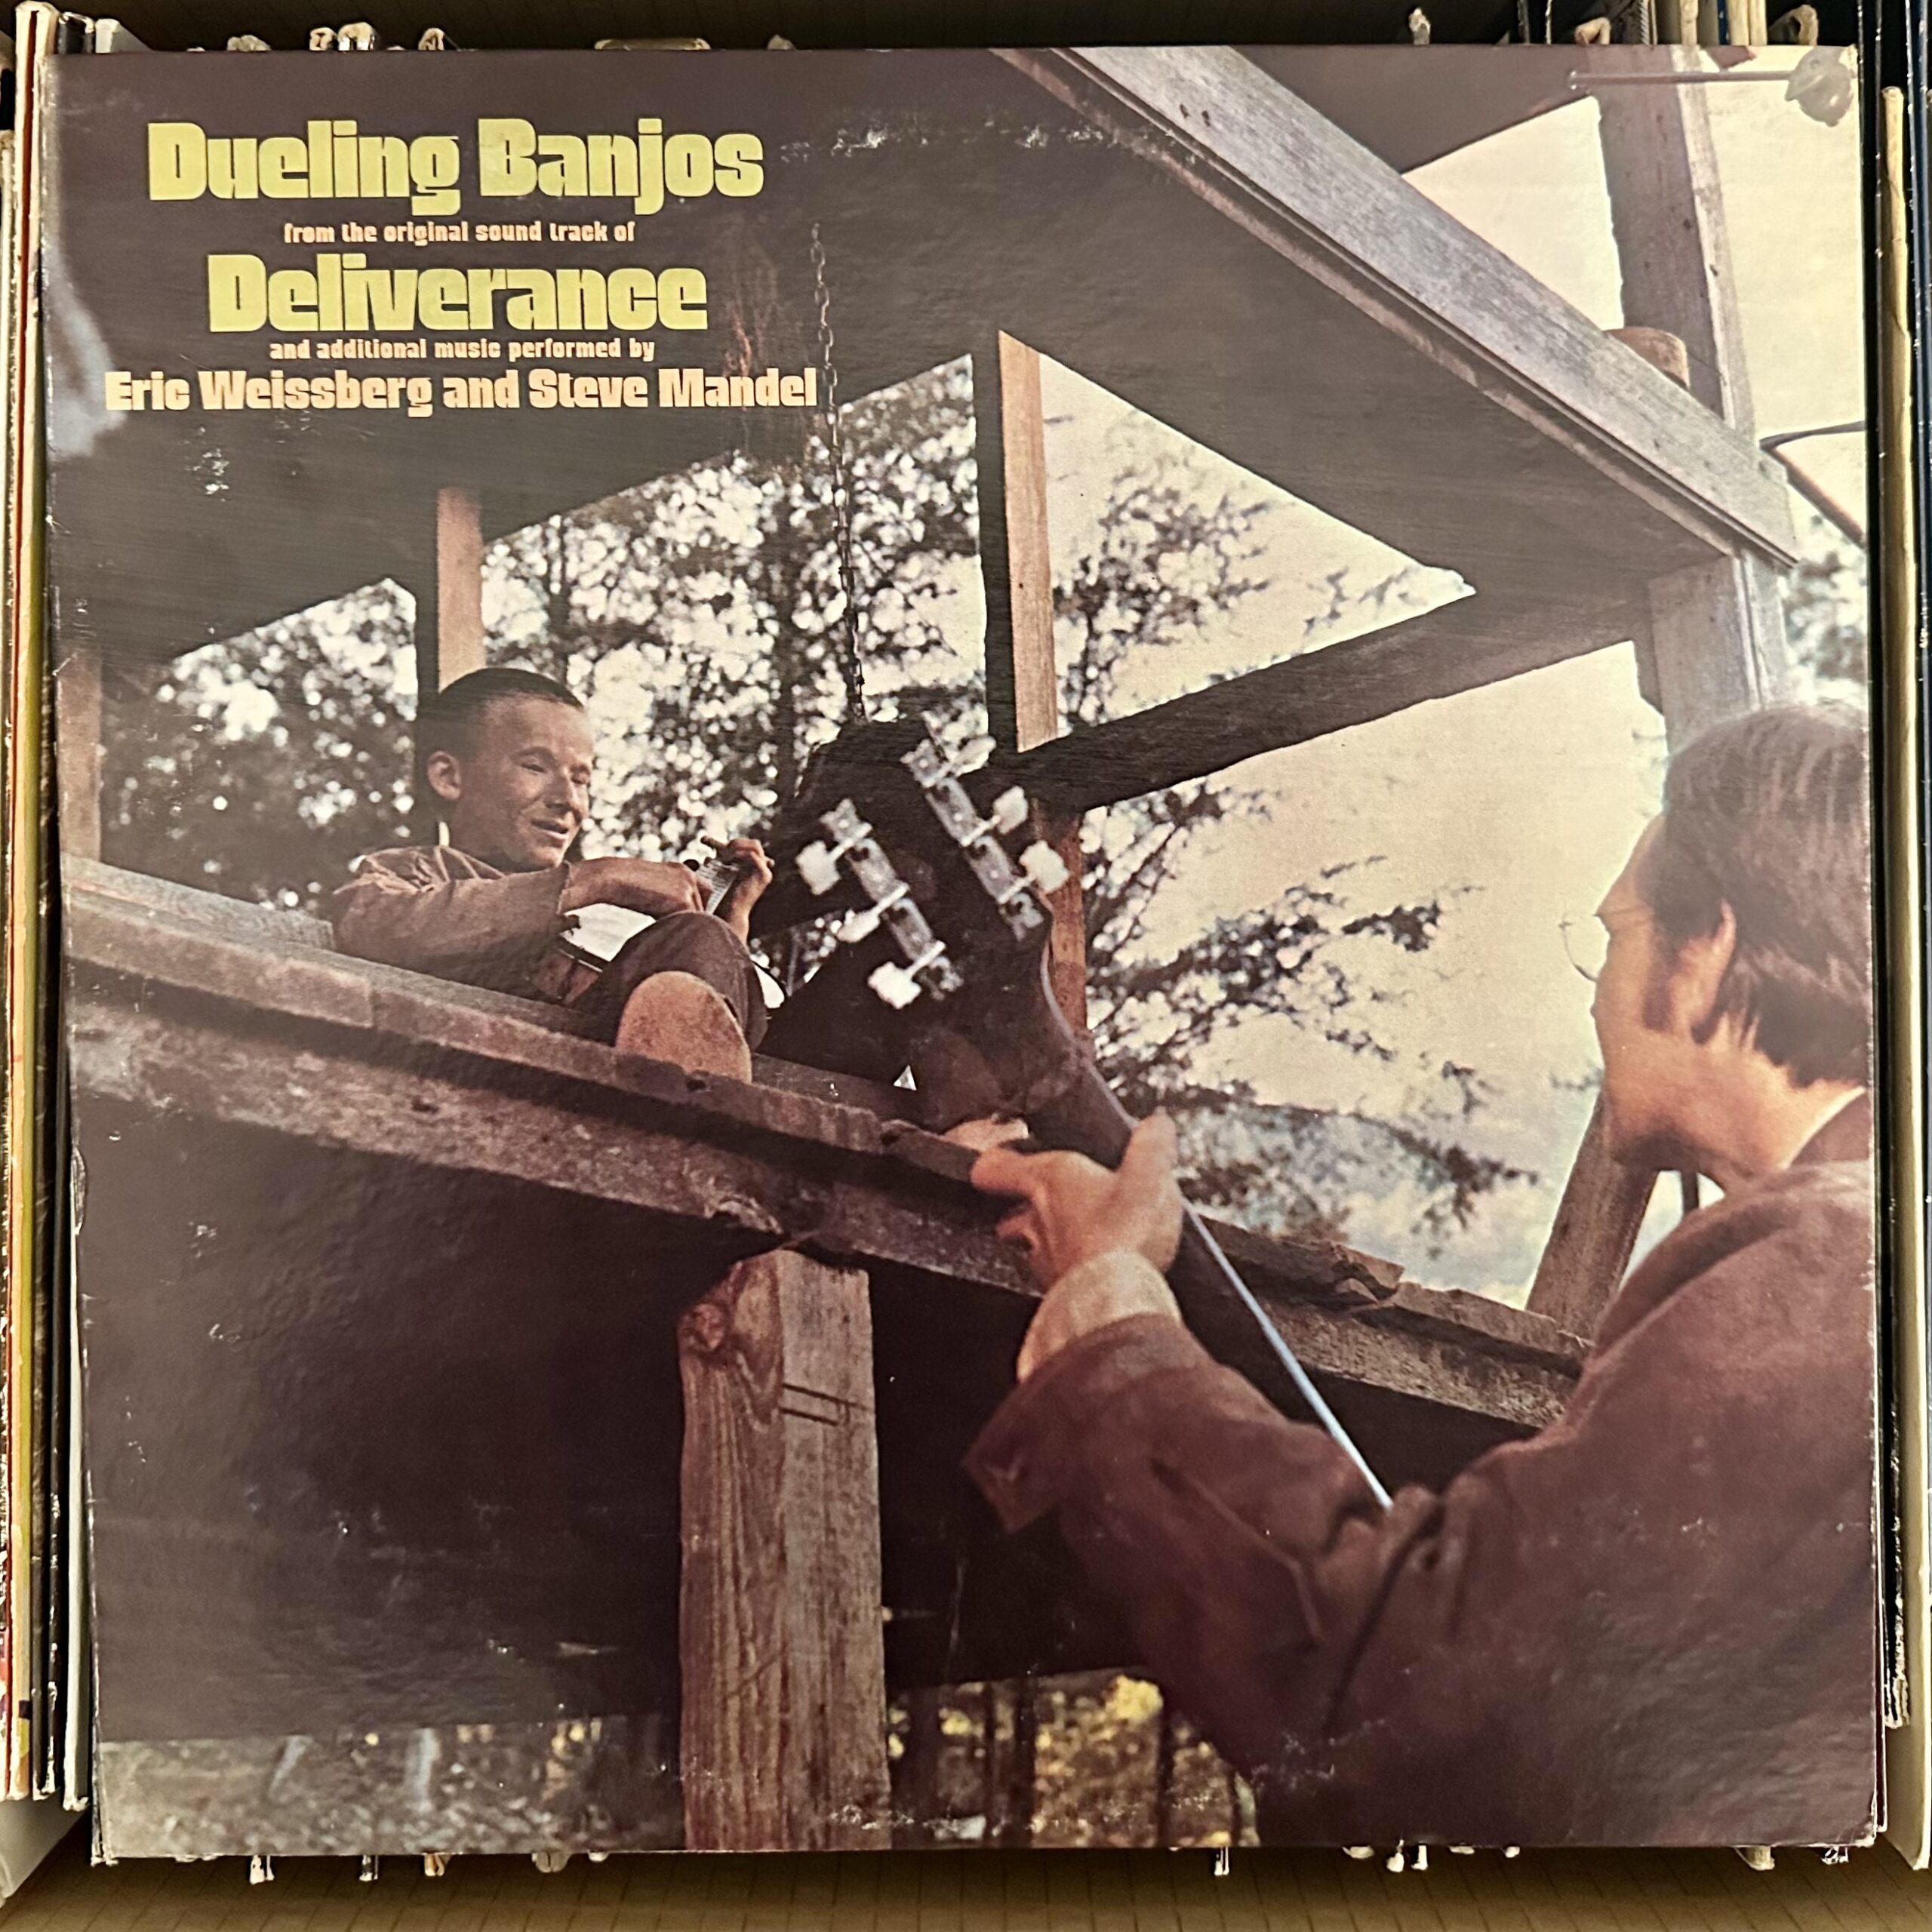 Dueling Banjos by Eric Weissberg and Steve Mandell